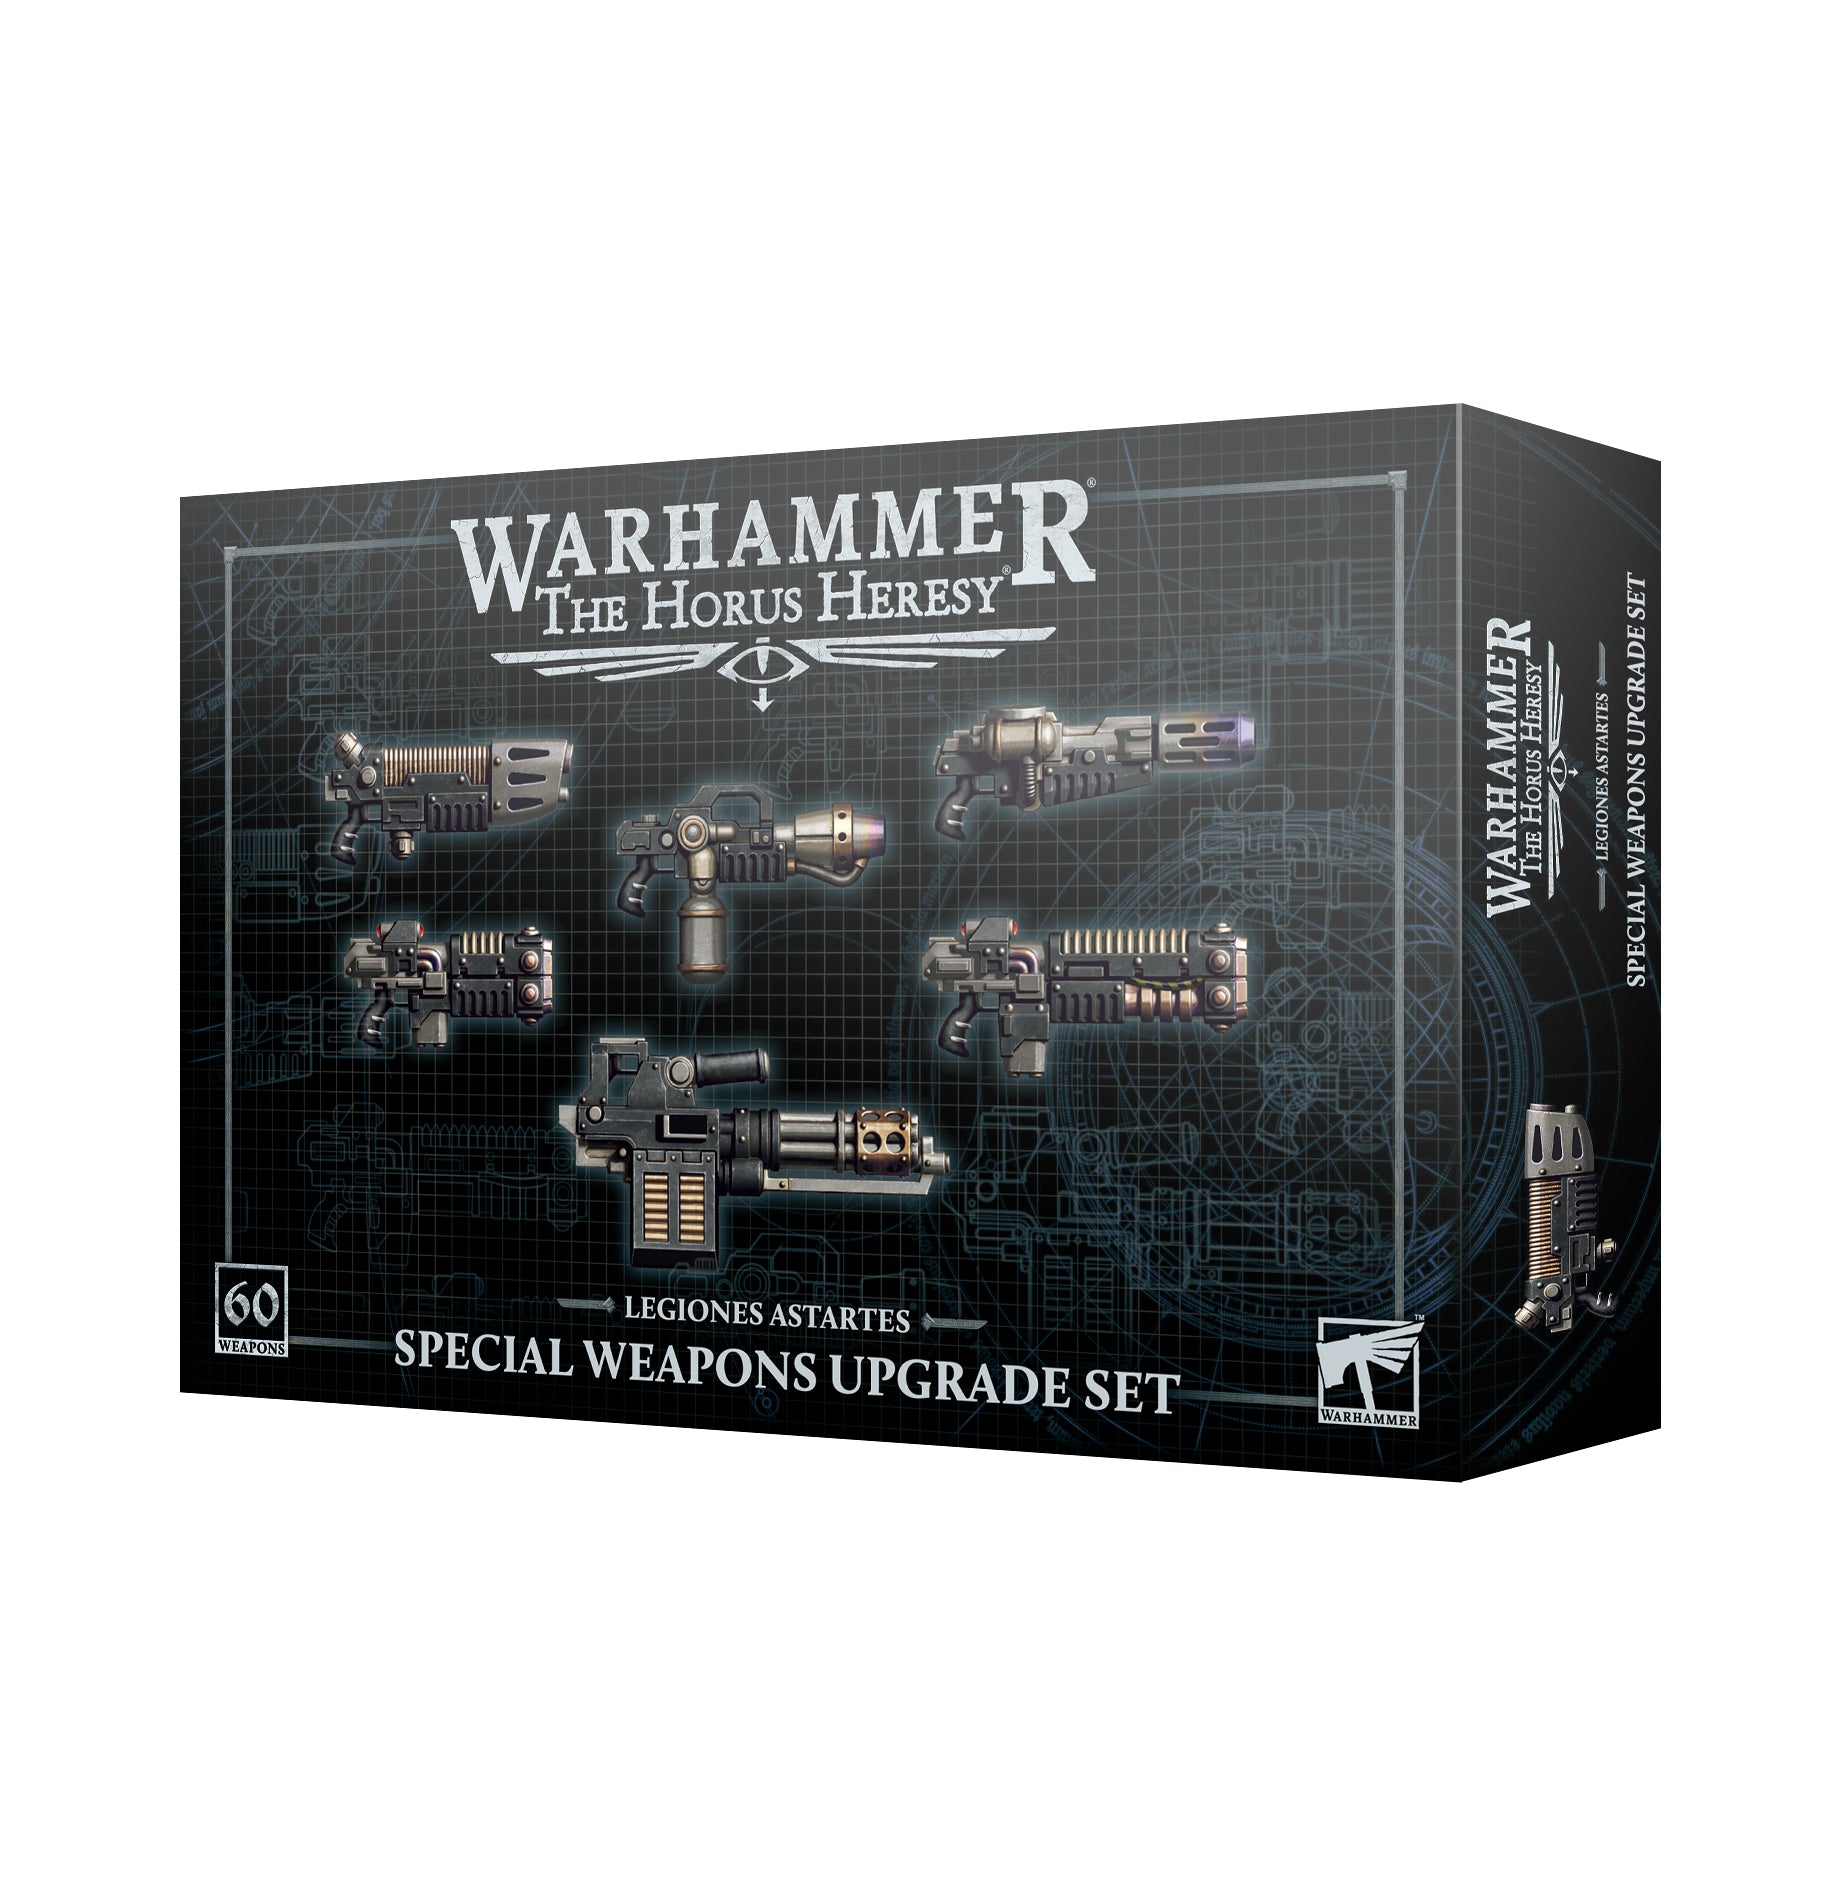 Warhammer The Horus Heresy: Special Weapons Upgrade Set | Gopher Games